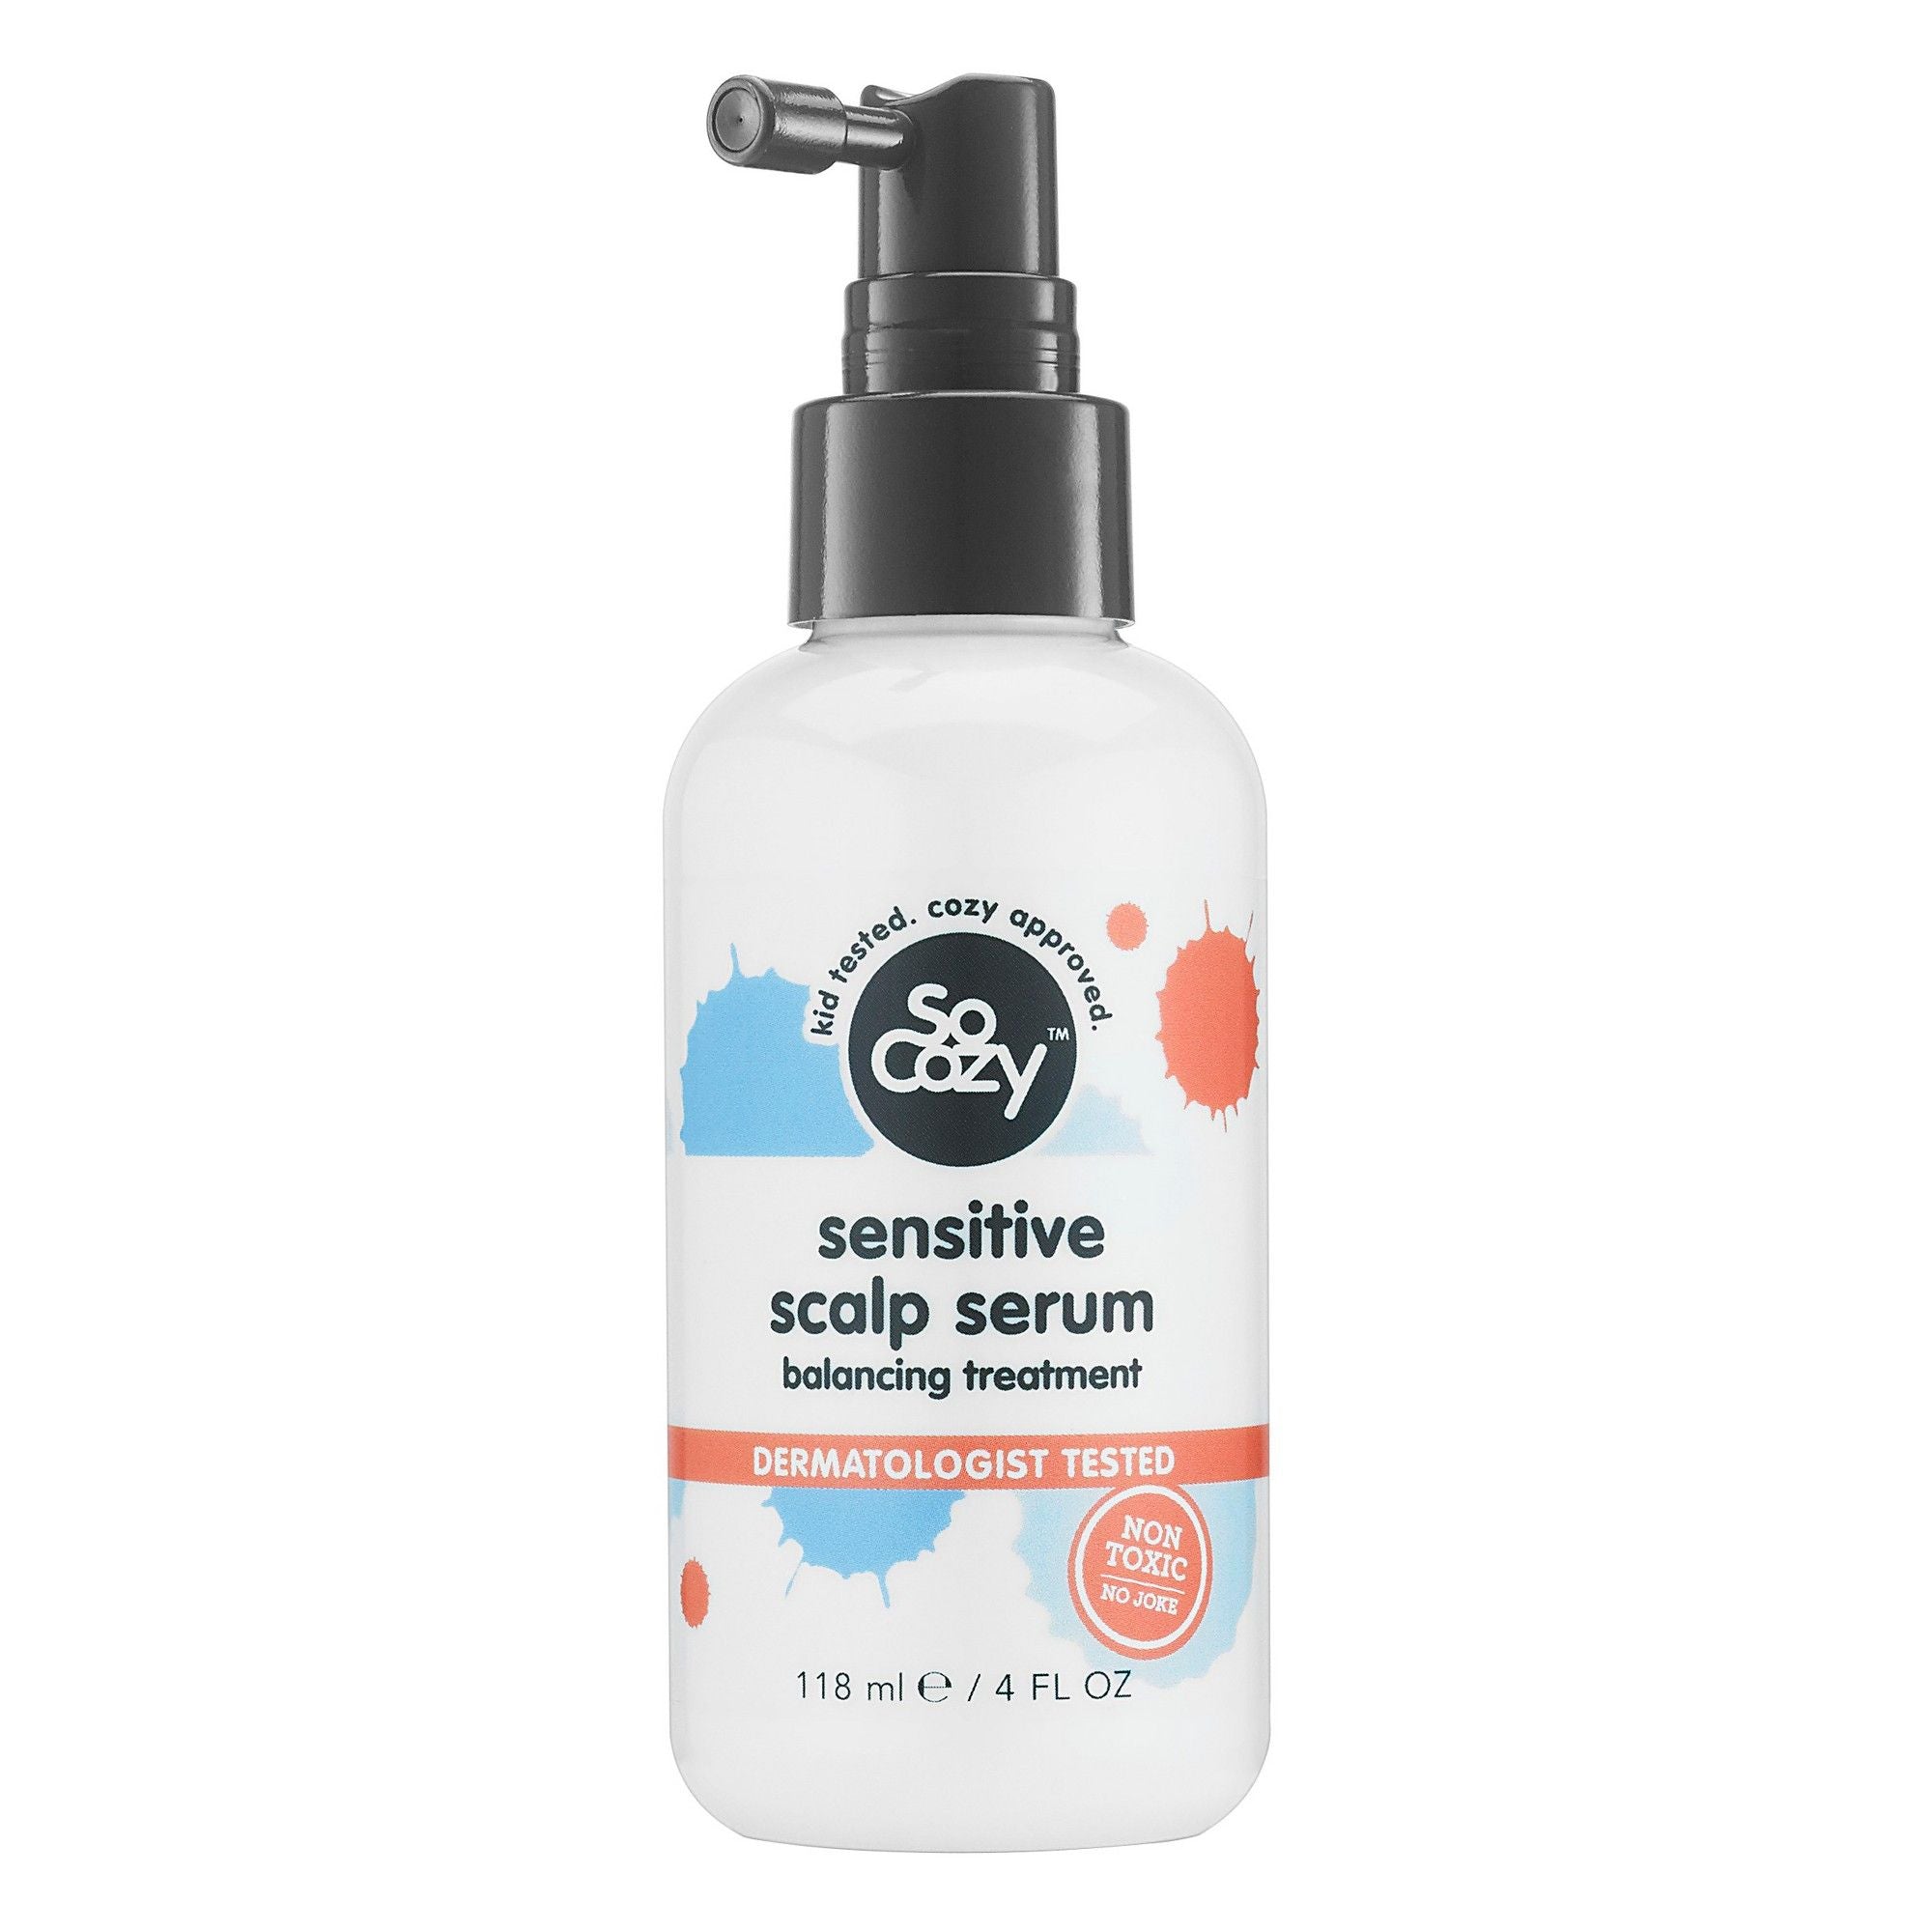 4th Ave Market: Sensitive Scalp Serum Balancing Treatment for Babies and Kids